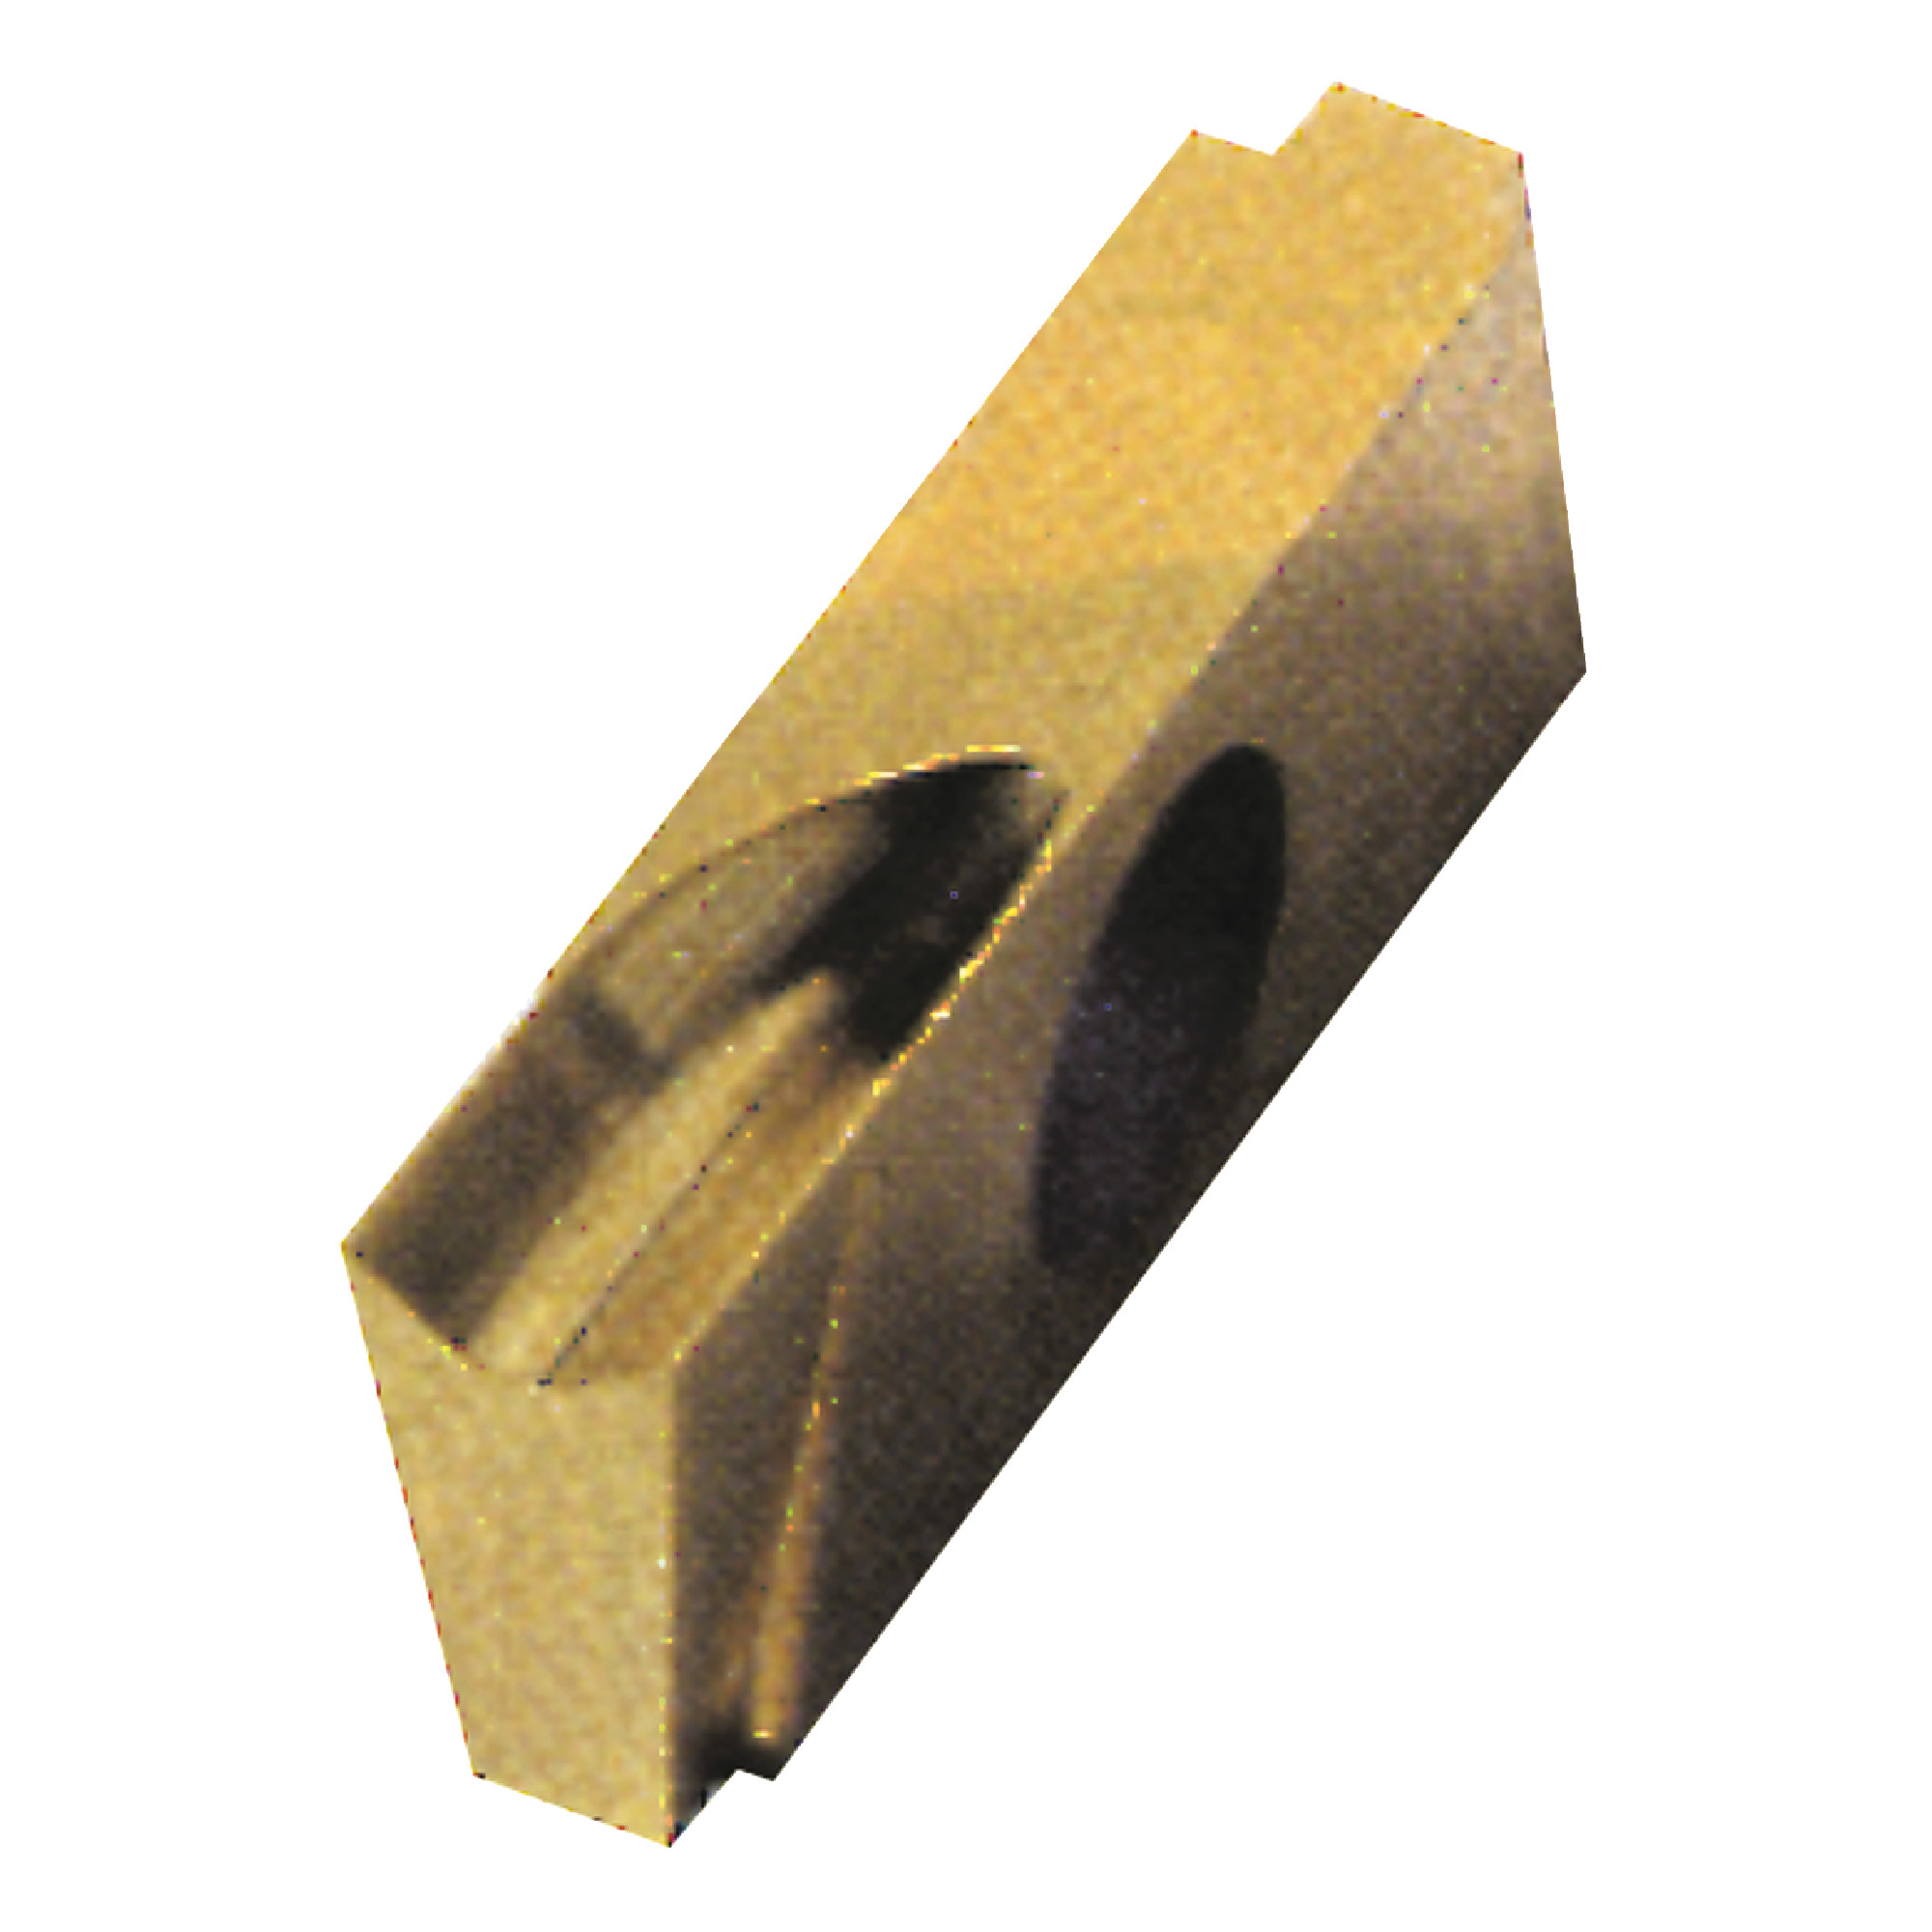 NIKCOLE - GIE-7-ST-3L C5-PV / Indexable Carbide Insert for Turning / 0.125" Cutting Width / Left Hand